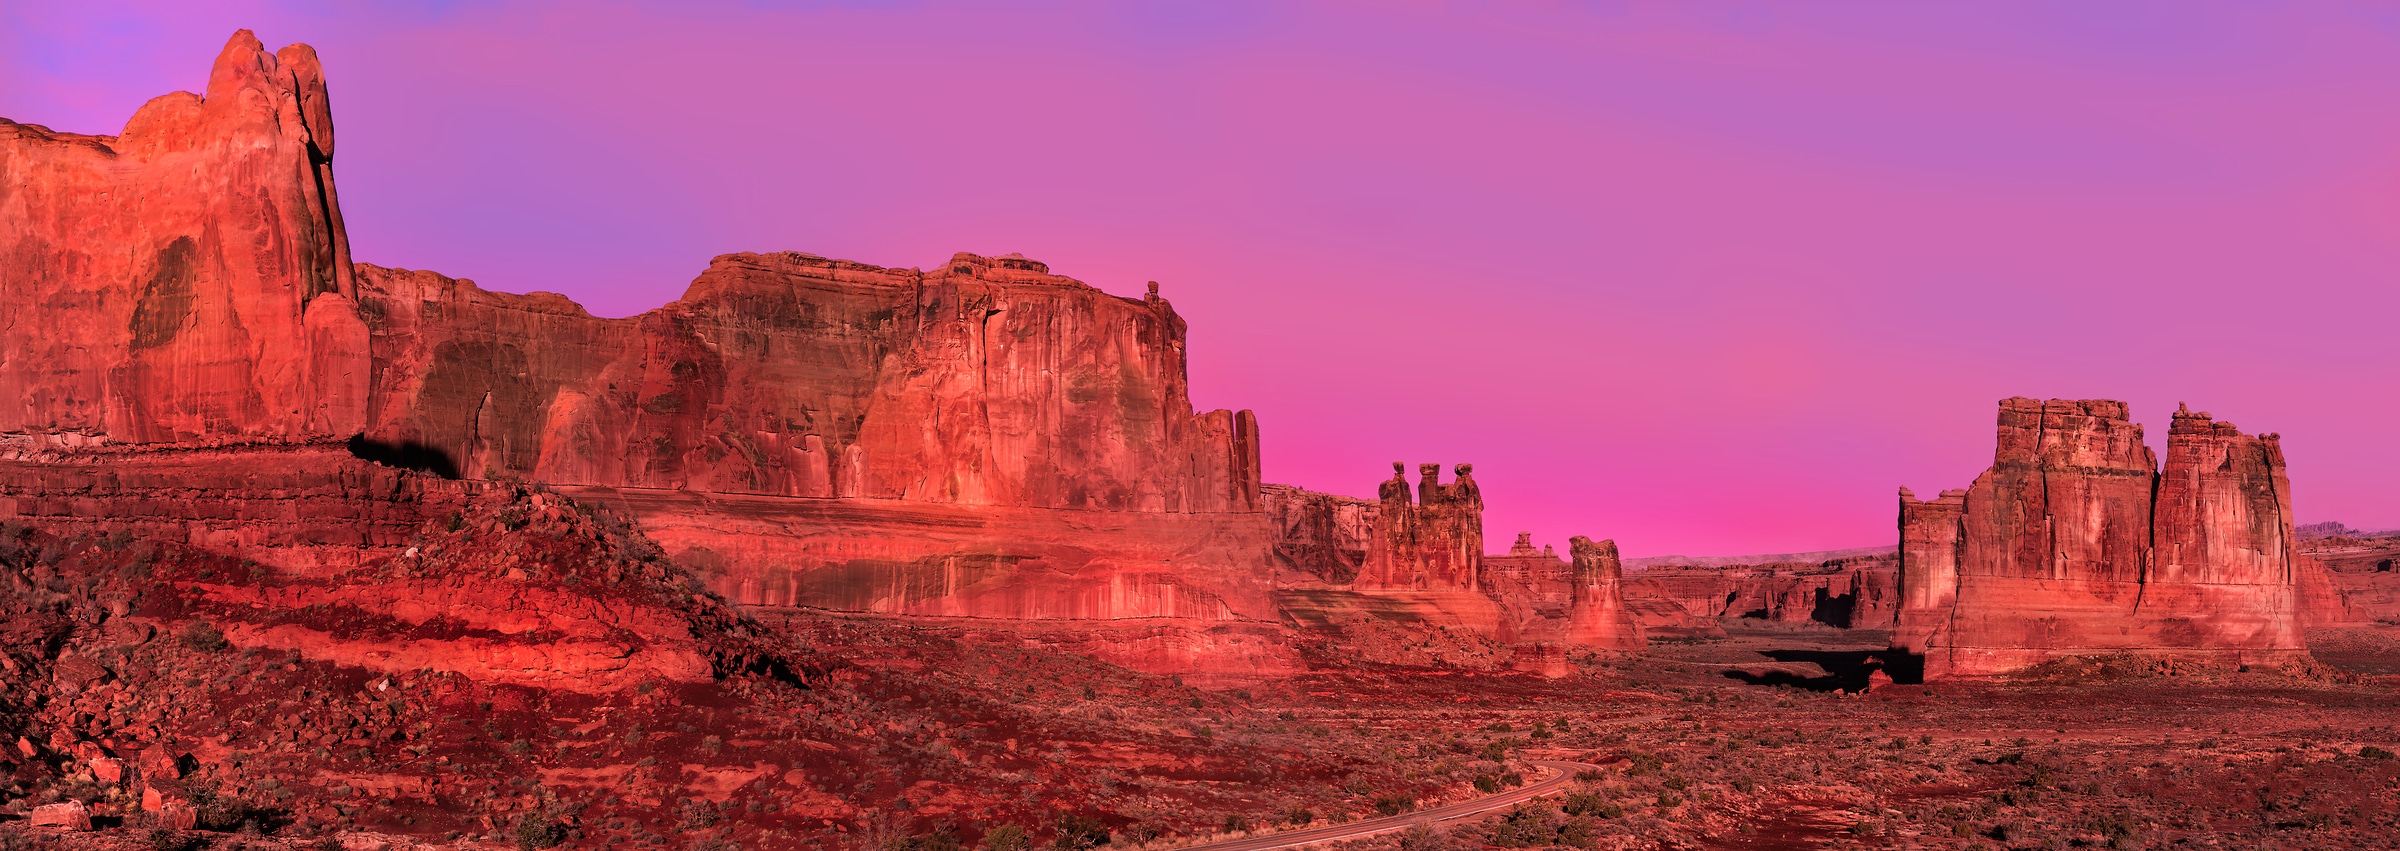 276 megapixels! A very high resolution, large-format VAST photo print of rock formations at Park Avenue in Arches National Park at sunset; landscape photograph created by David David at Park Avenue in Arches National Park, Utah.